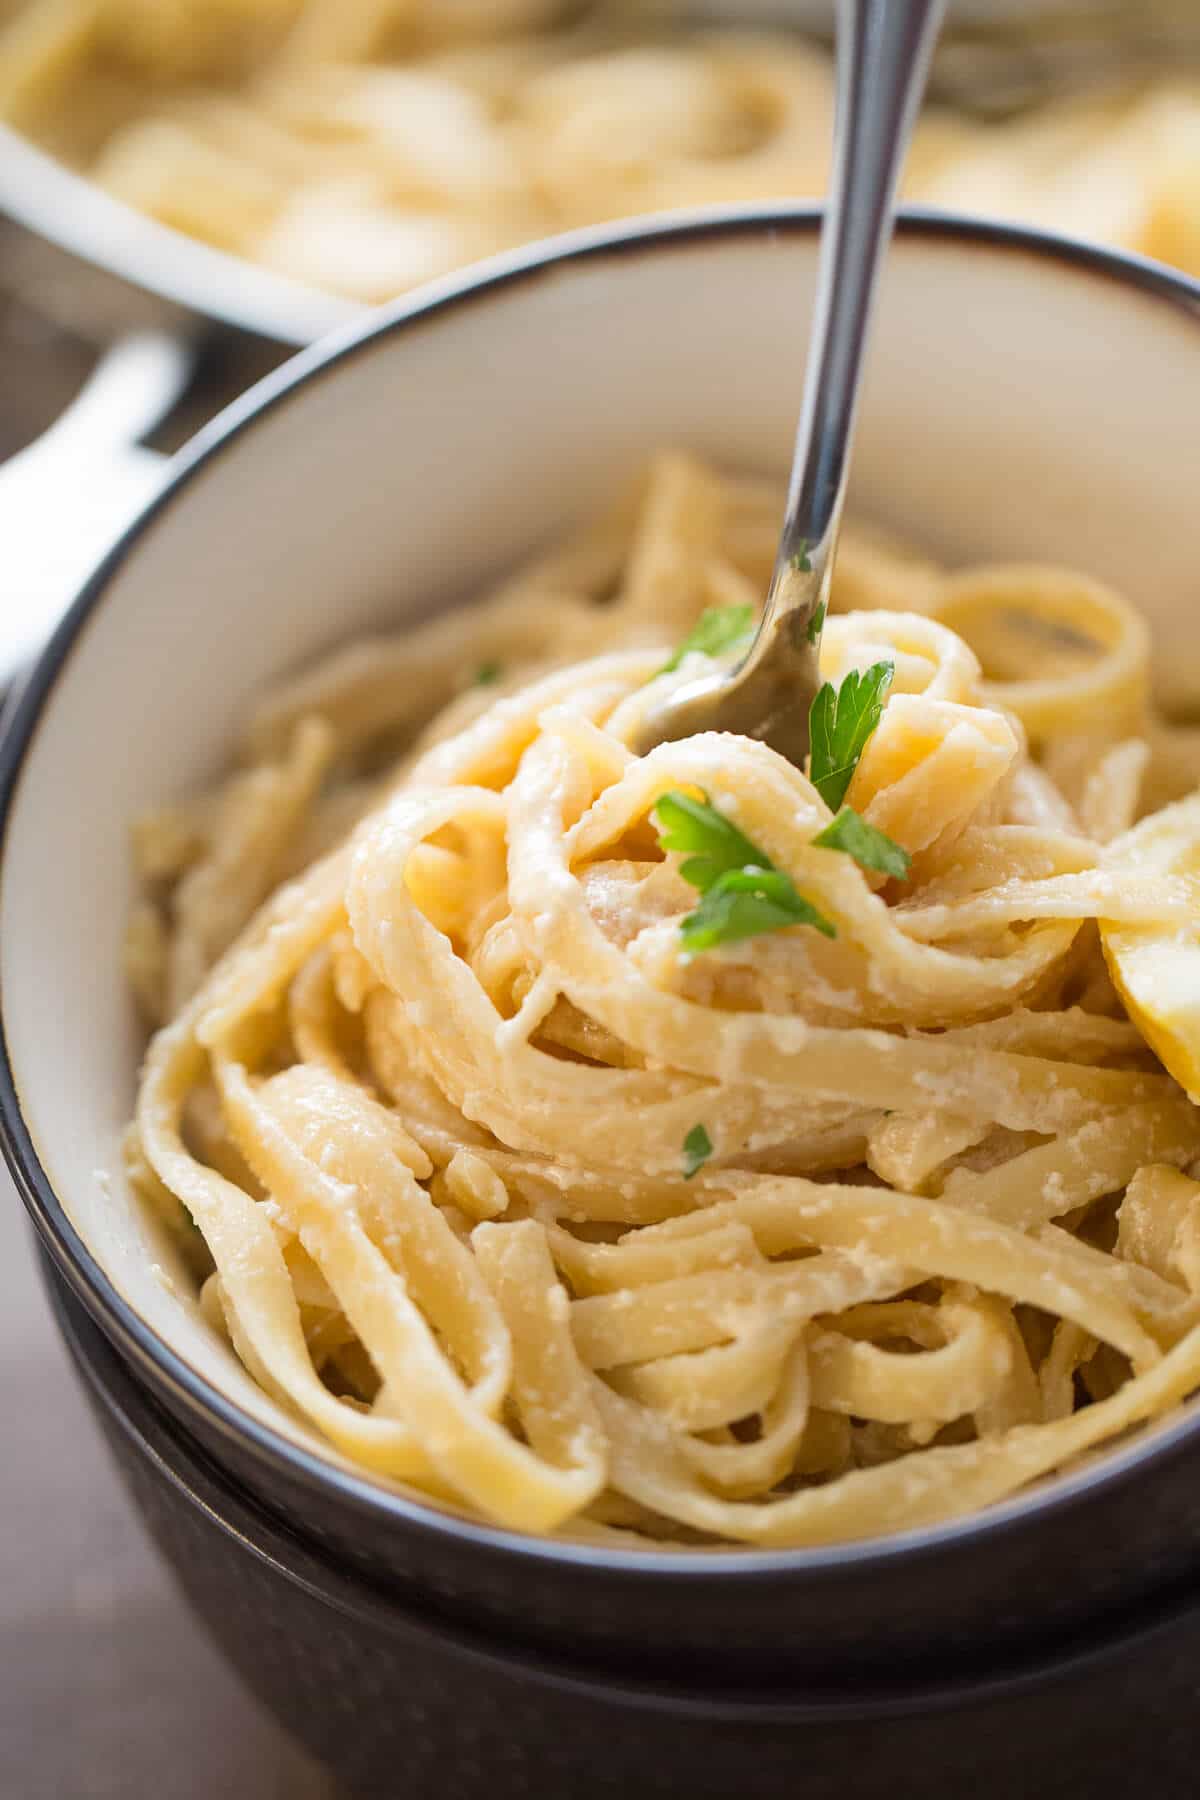 Alfredo a favorite? Then you will love this easy fettuccine Alfredo recipe! The lemon sauce is to die for!